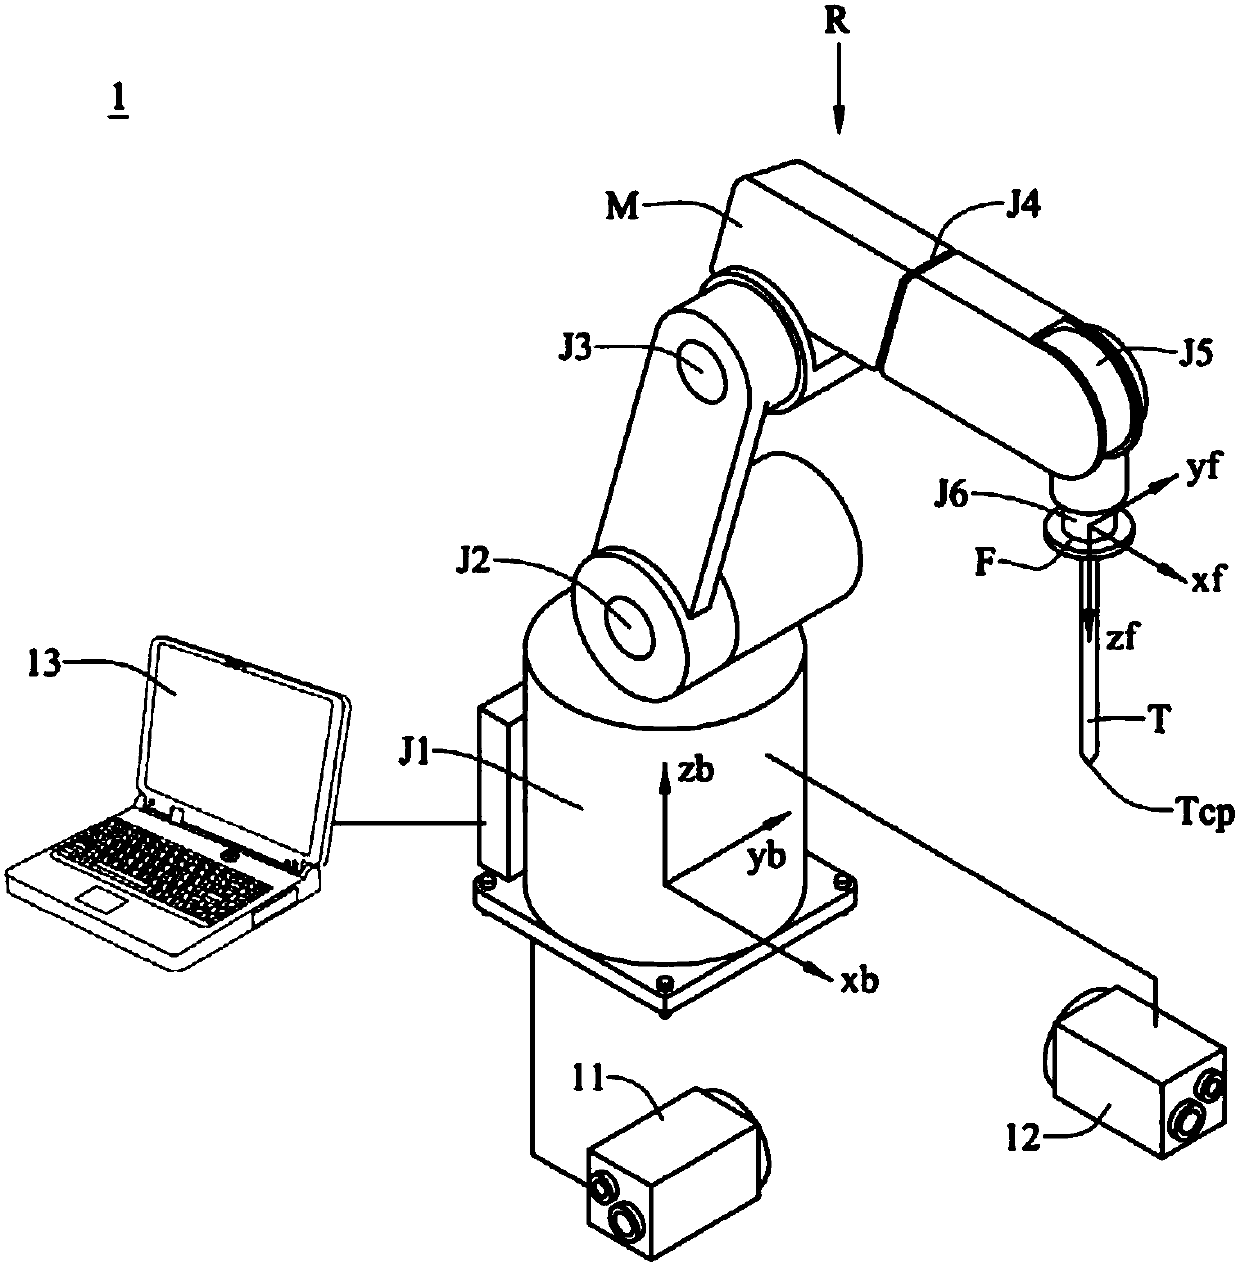 System and method for calibrating tool center point of robot